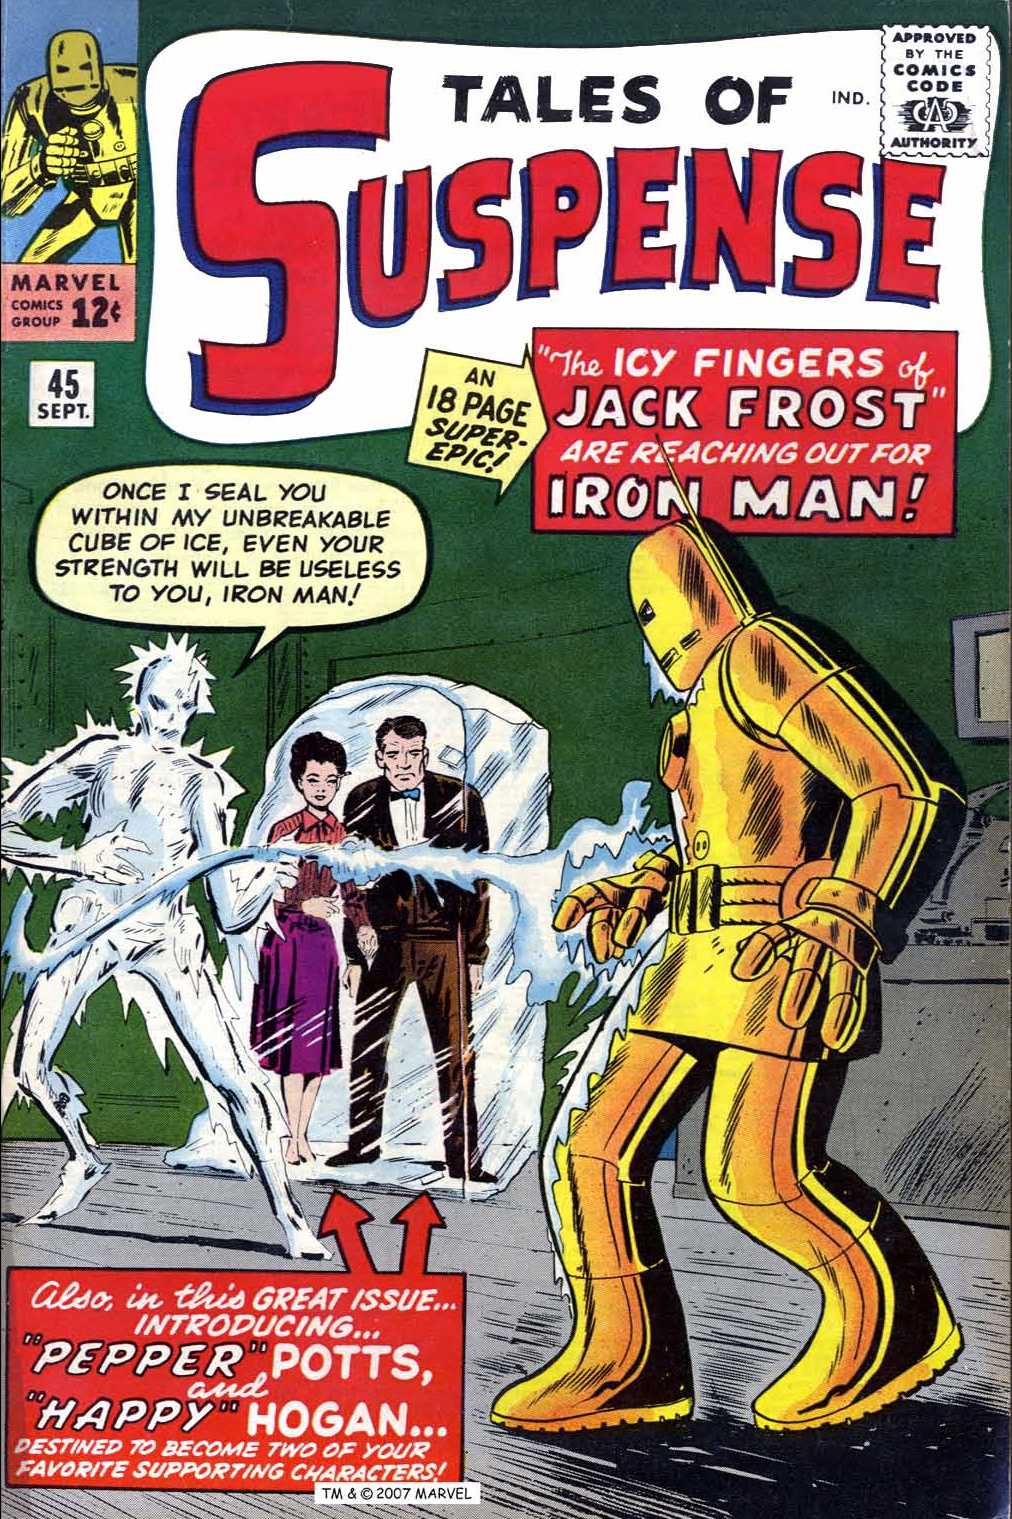 Tales of Suspense #45 cover: Iron Man vs Jack Frost feat. Happy Hogan and Pepper Potts